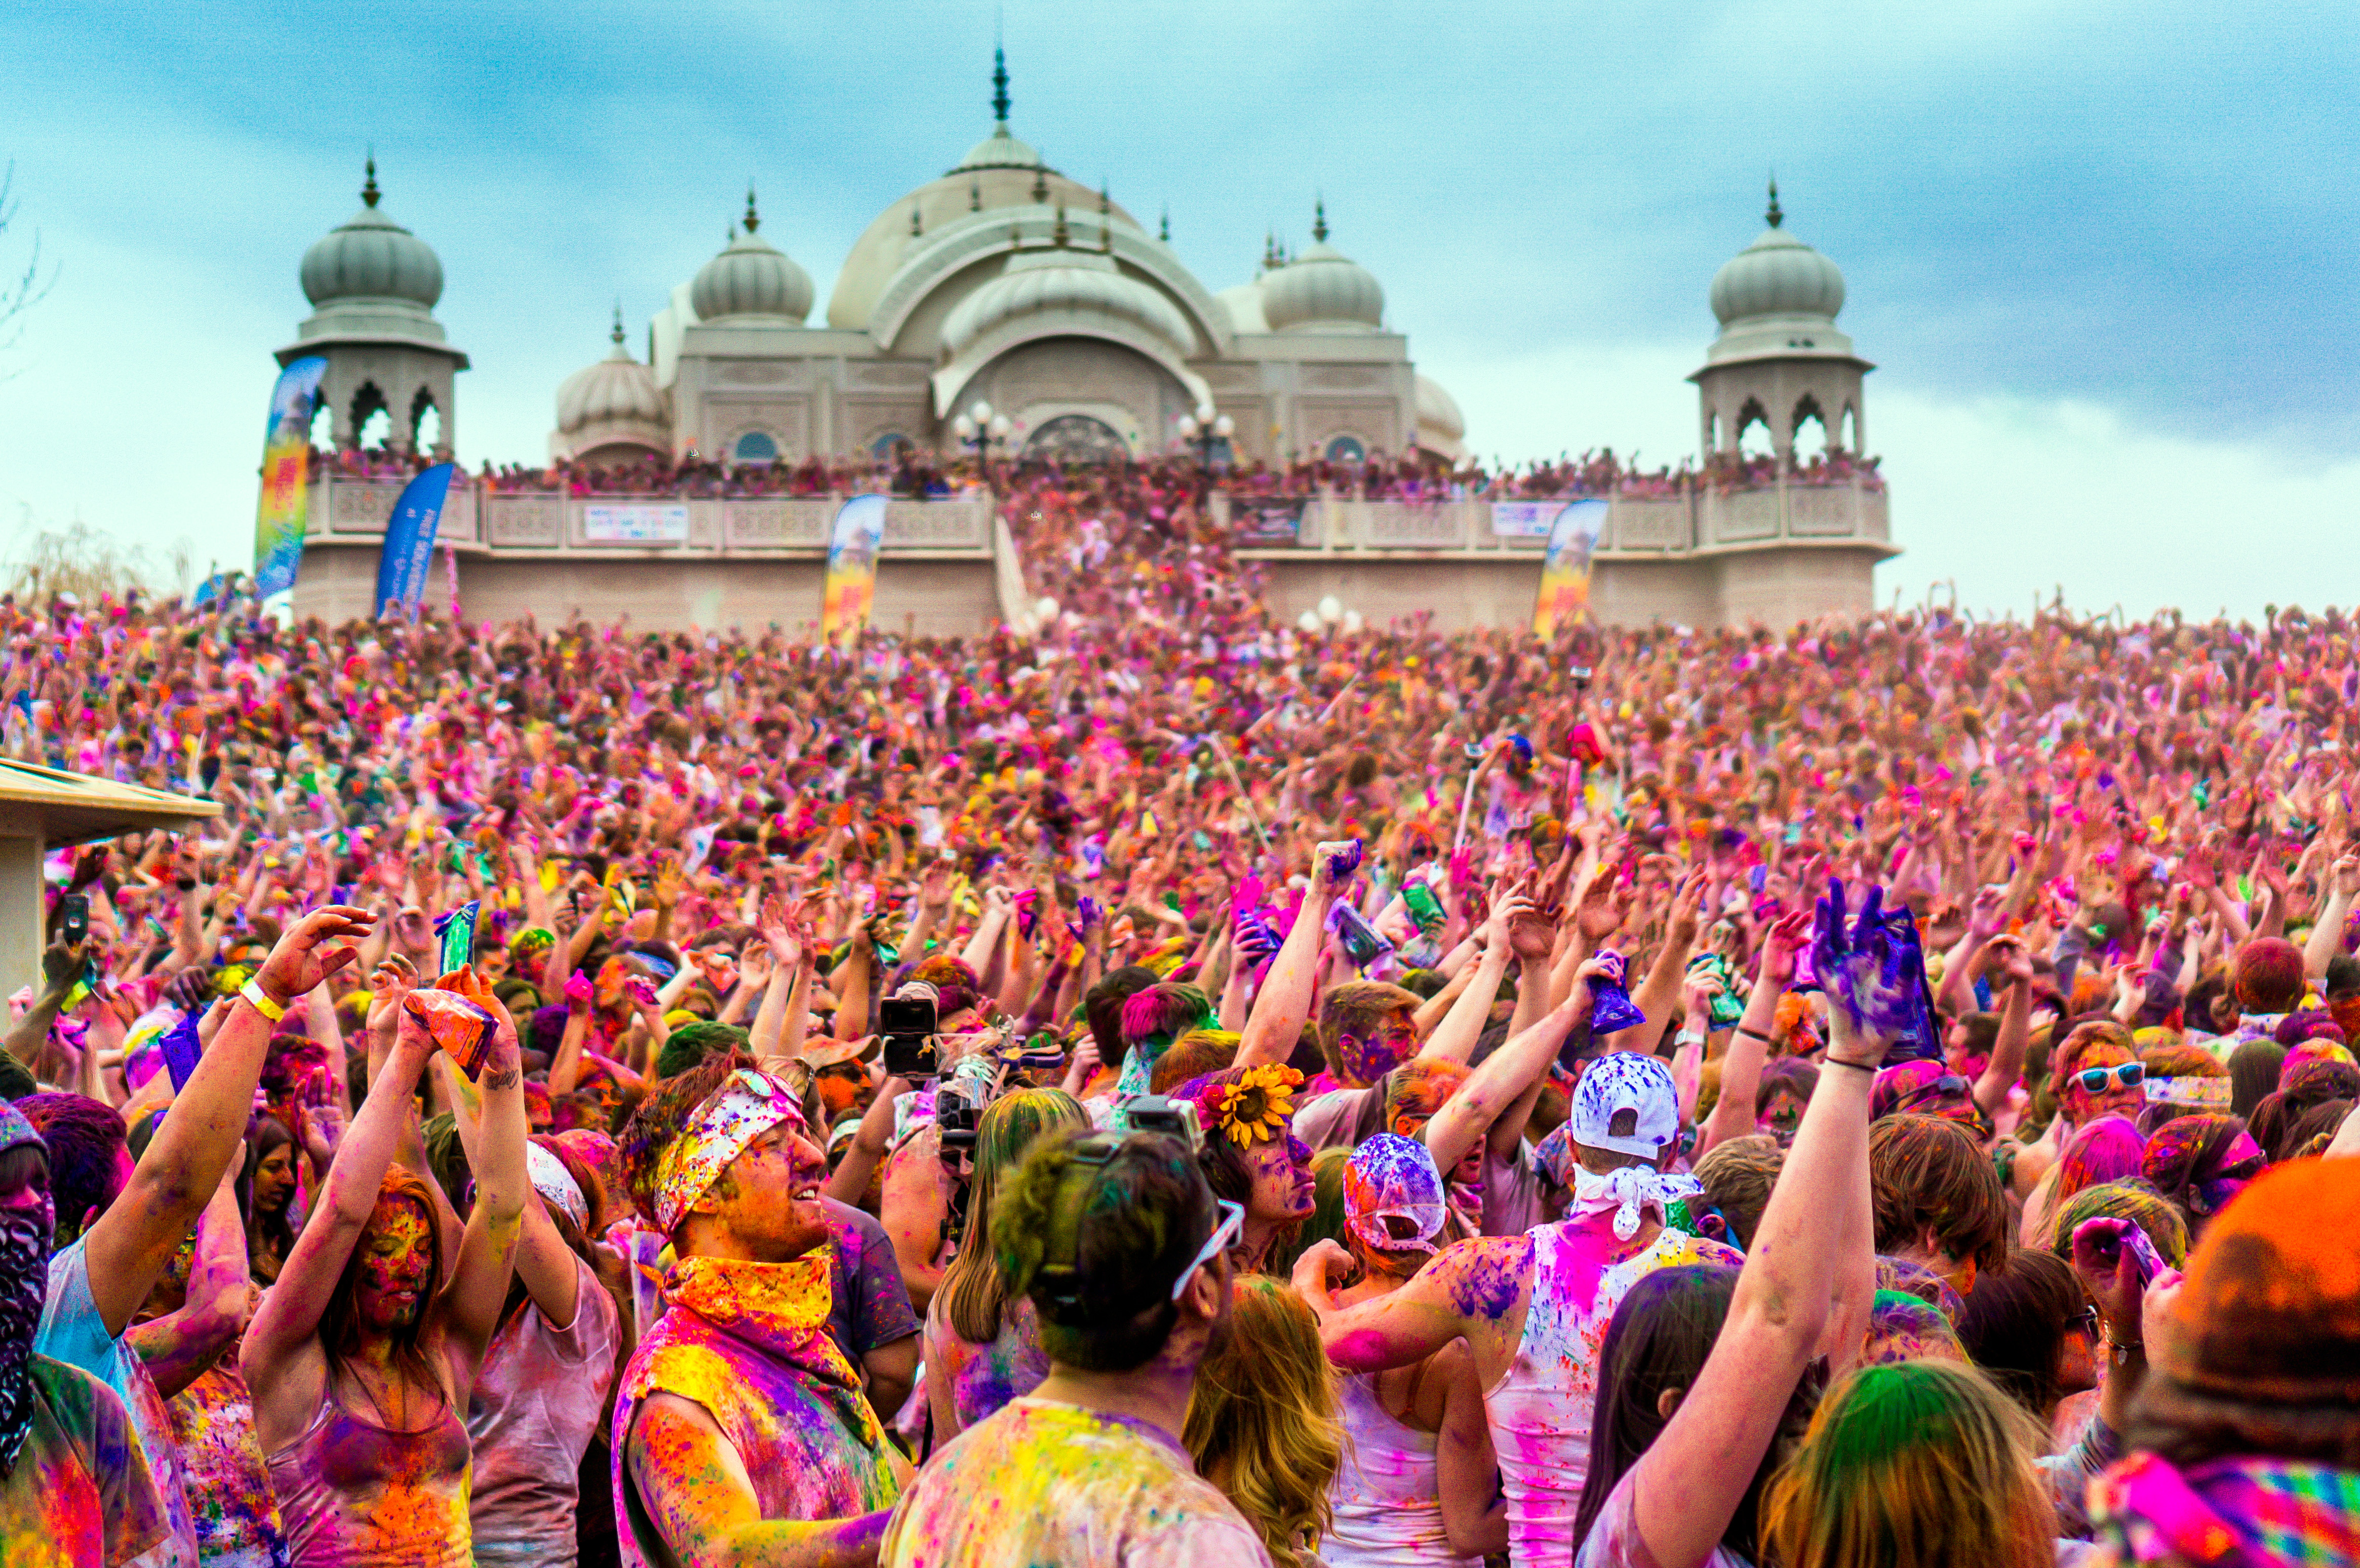 Holi Festival - 8 Festivals From Around The World To Add To Your Bucket List